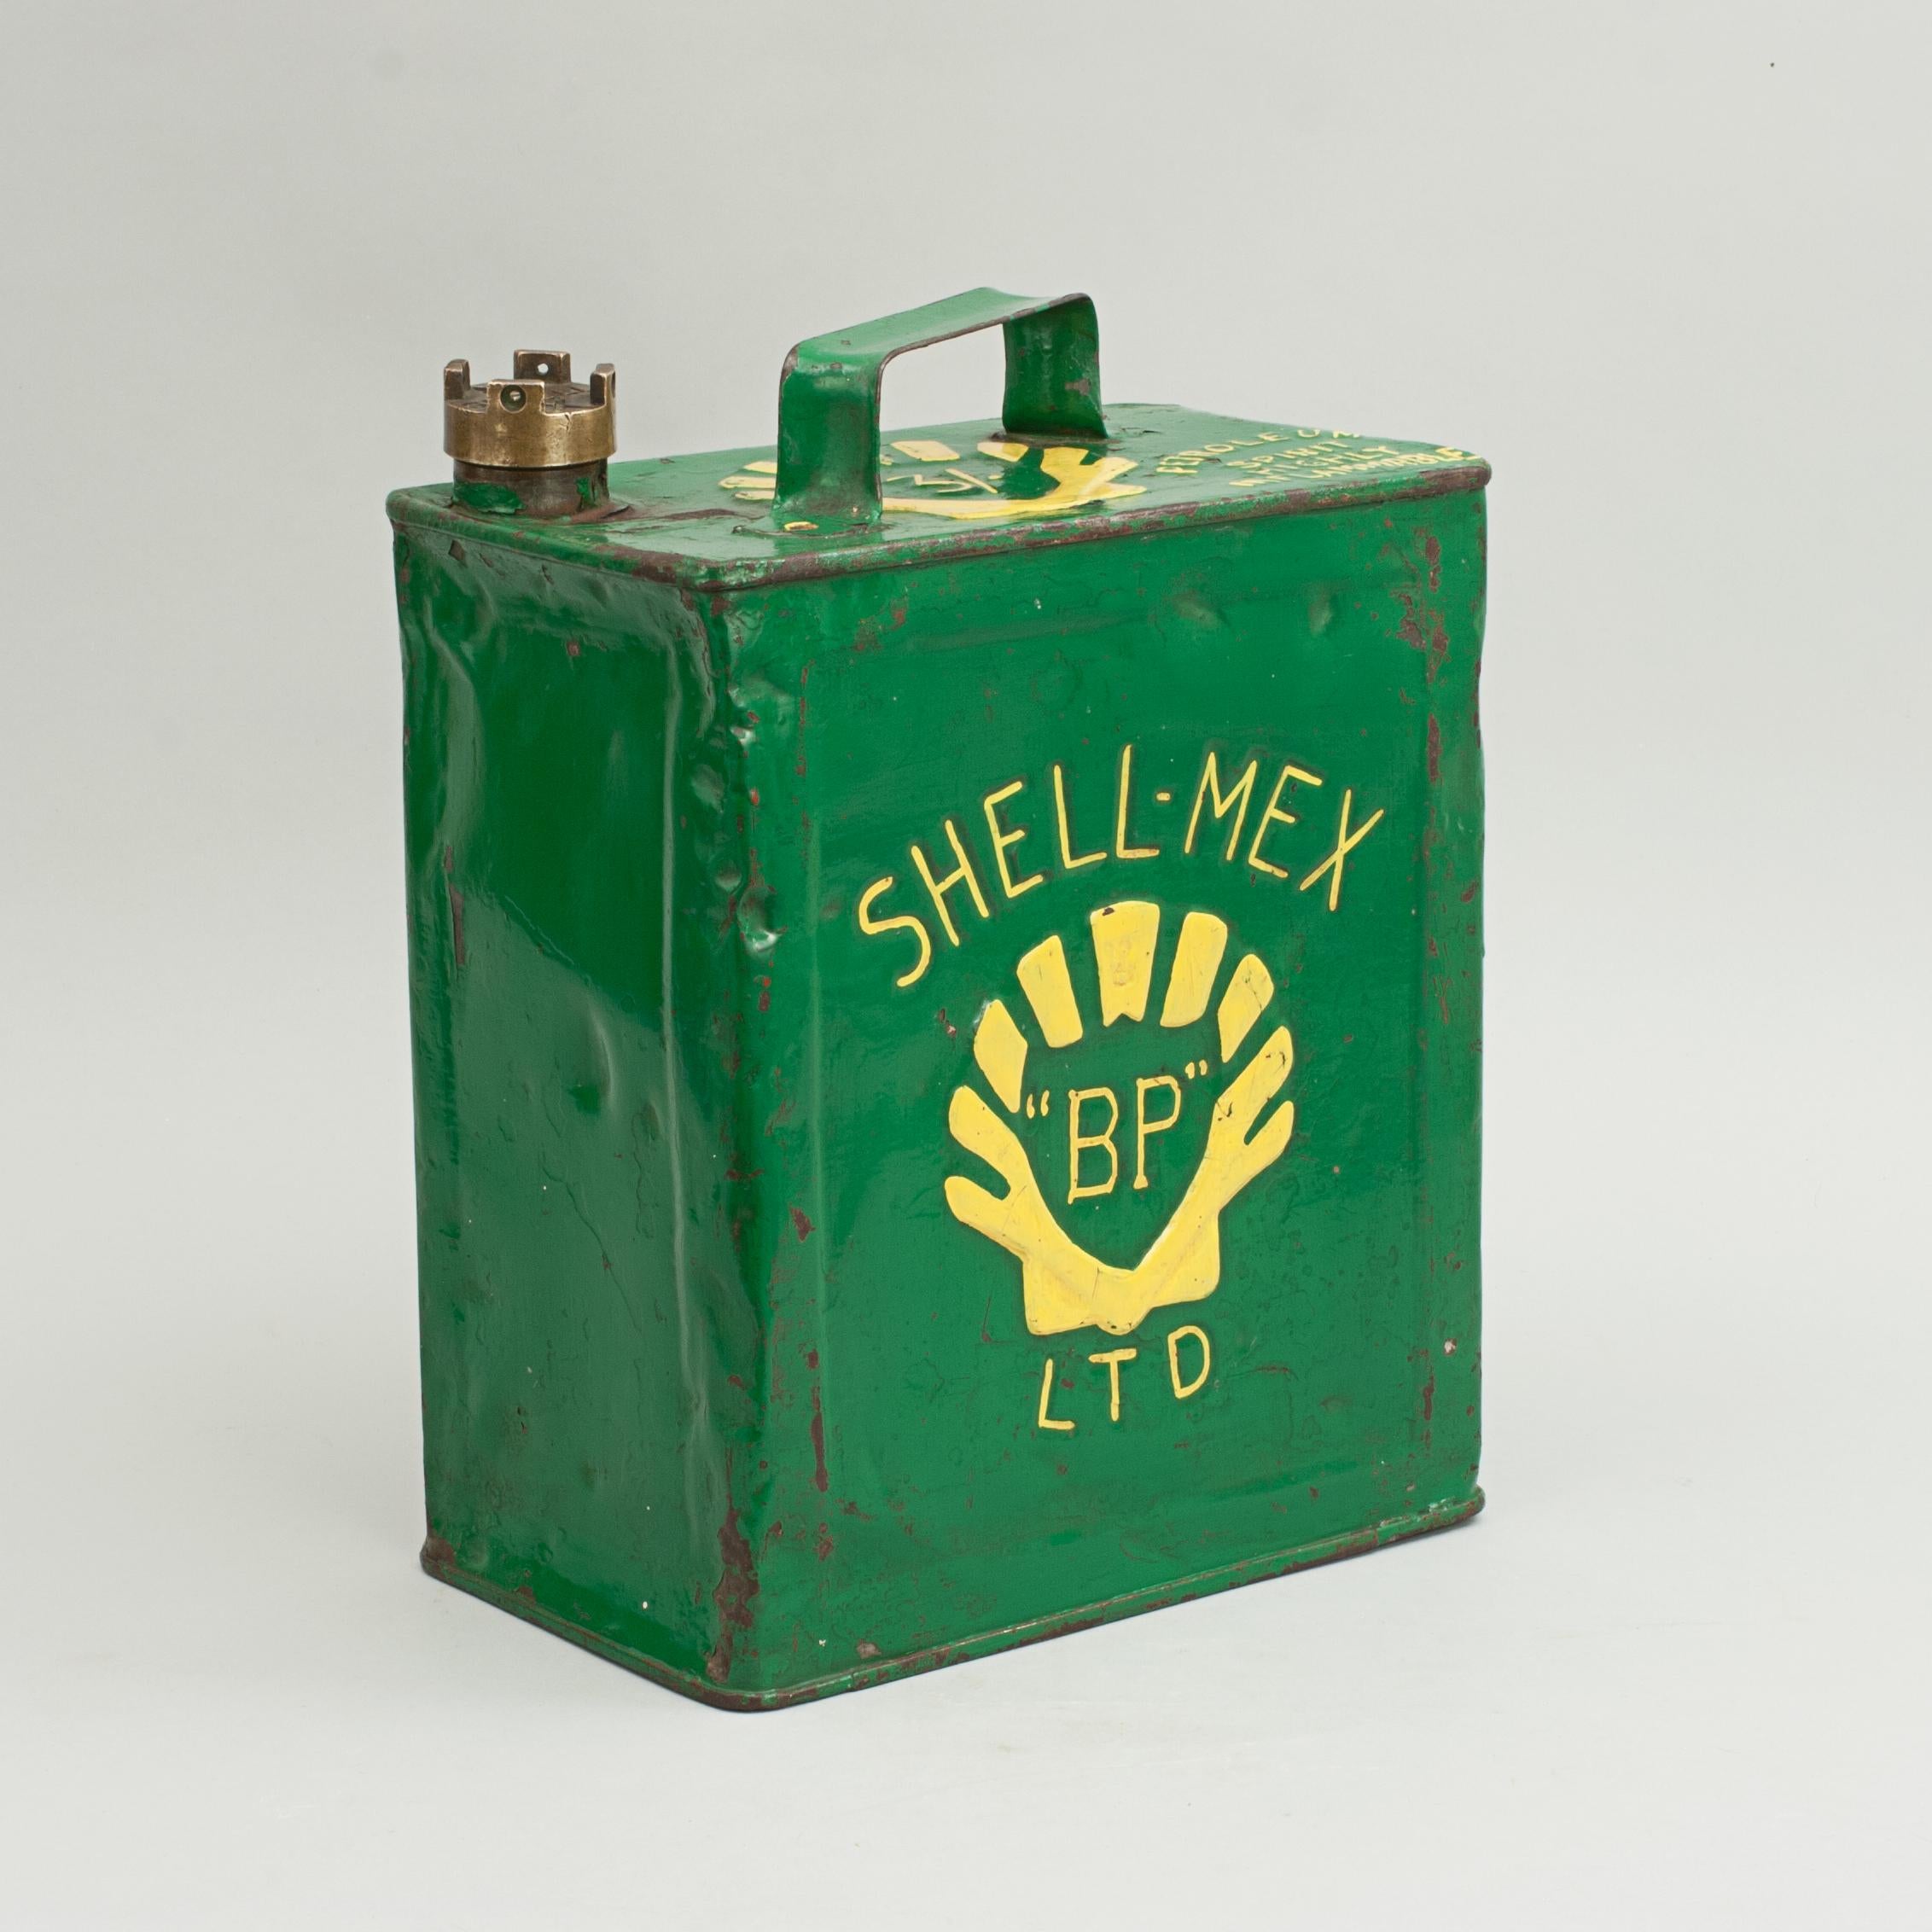 English Vintage Shell-Mex Fuel Can, Tin Petrol Can